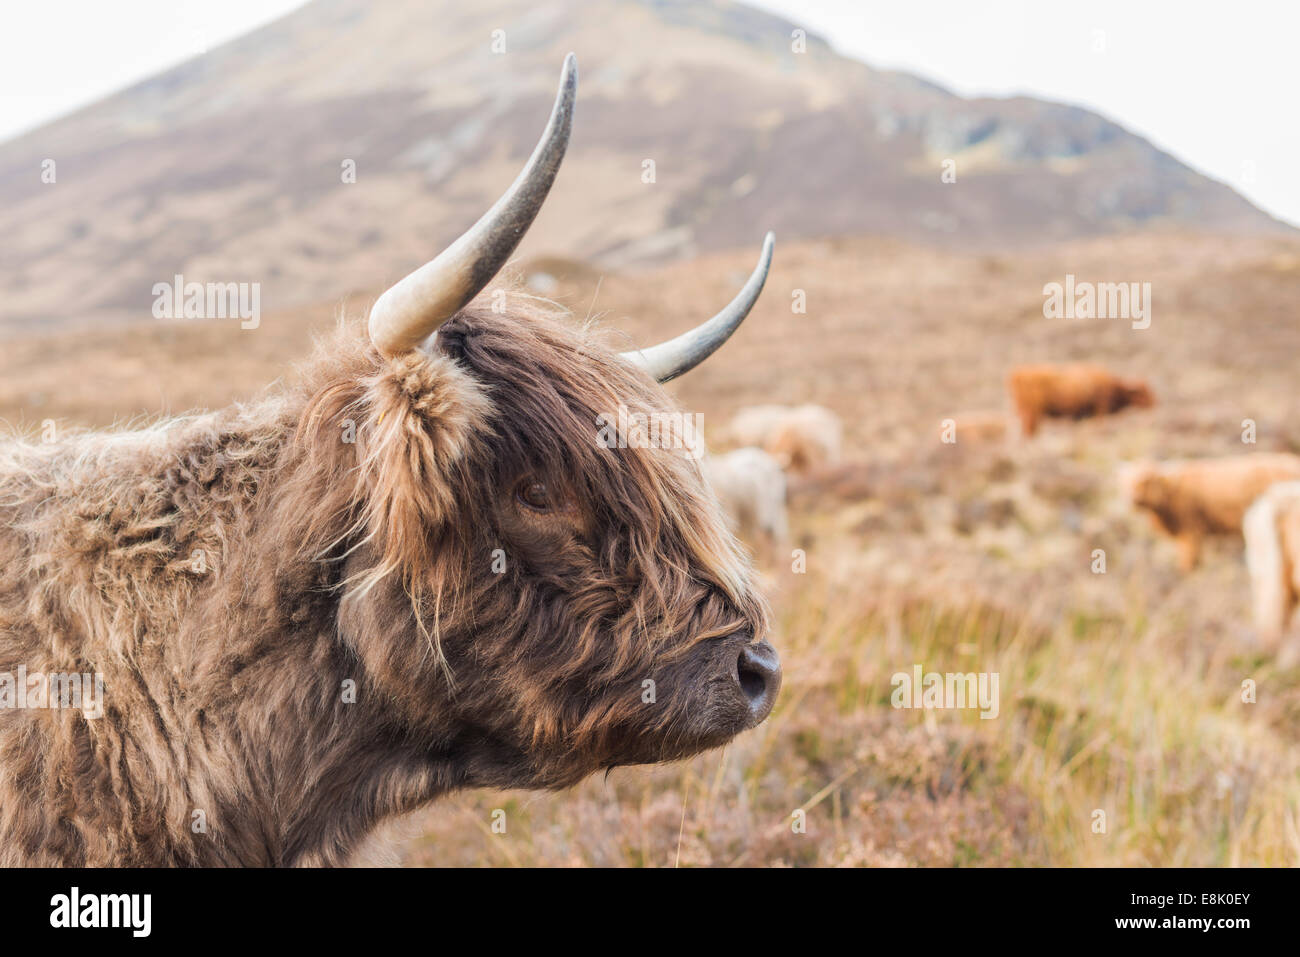 A highland cattle in Scotland. Stock Photo